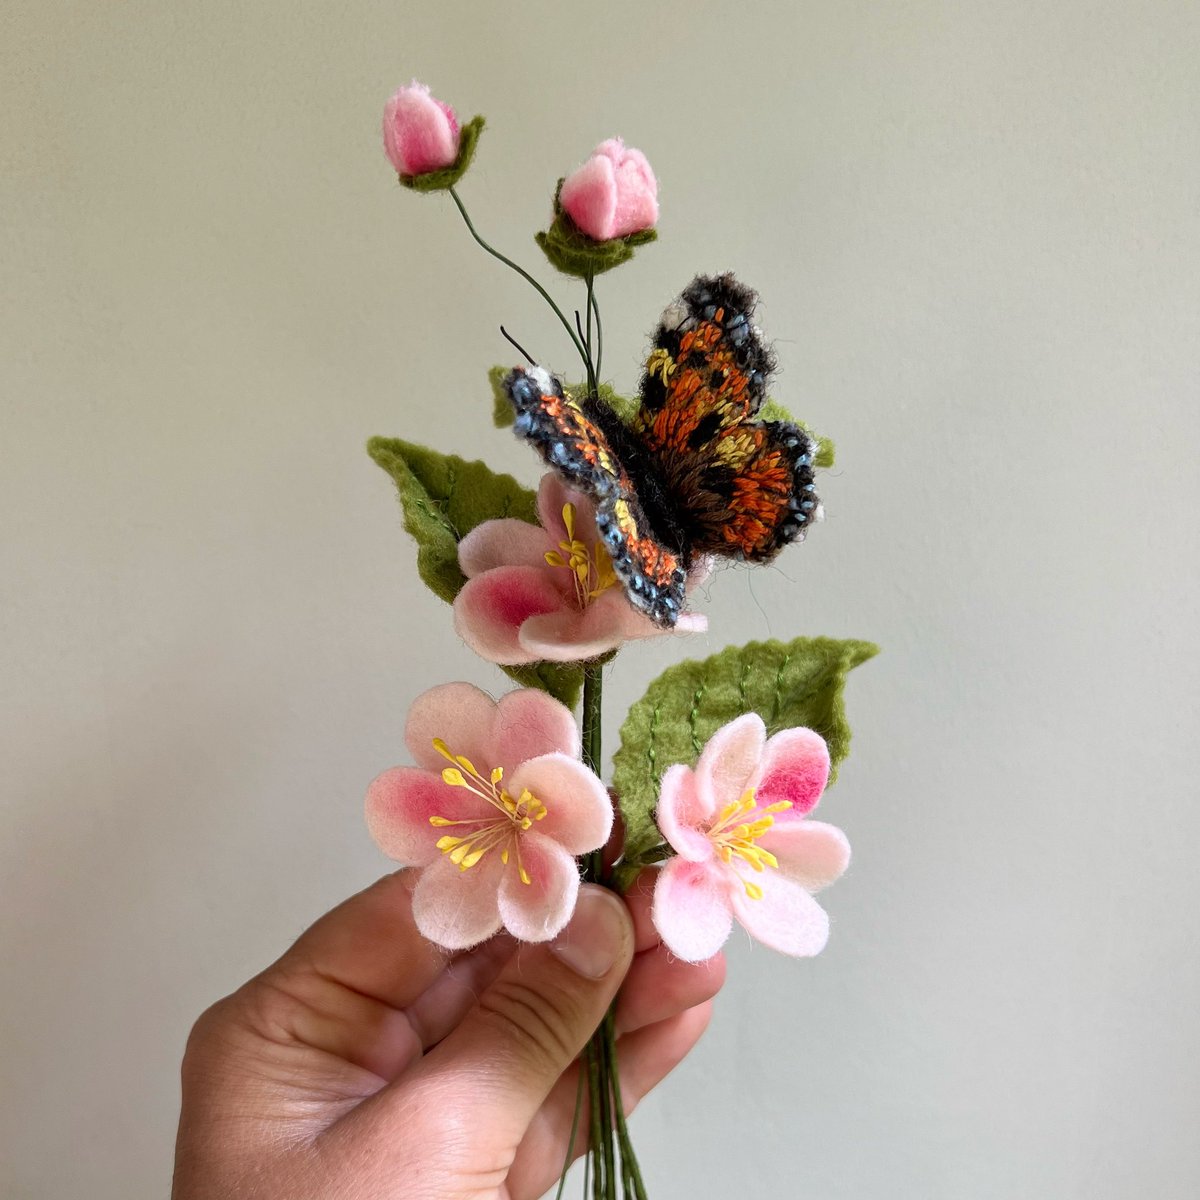 I am creating another Spring wreath which I am making the elements for at present. Here is a quick peek at the felt apple blossom & the small #Tortoiseshellbutterfly that will be part of this next wreath #woolfelt #handmade #choosewool #springmakes #campaignforwool #madeinBath